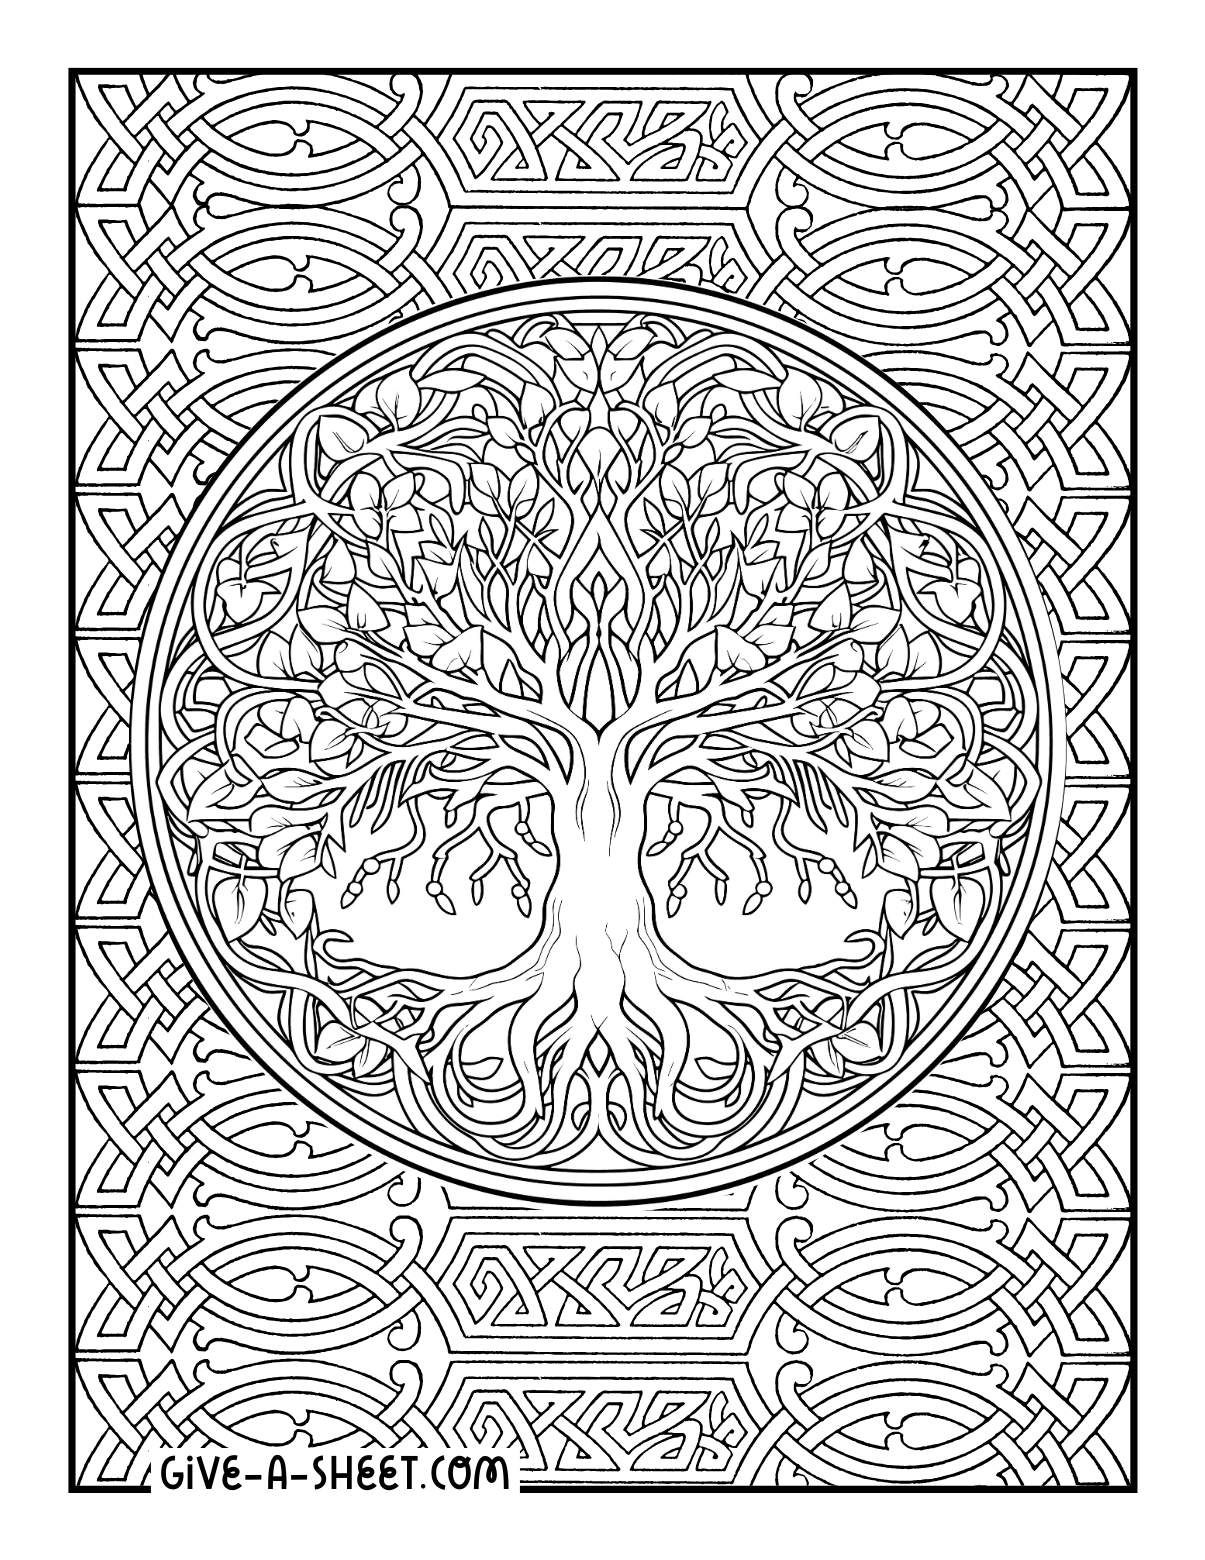 Celtic tree of life coloring page with intricate details.